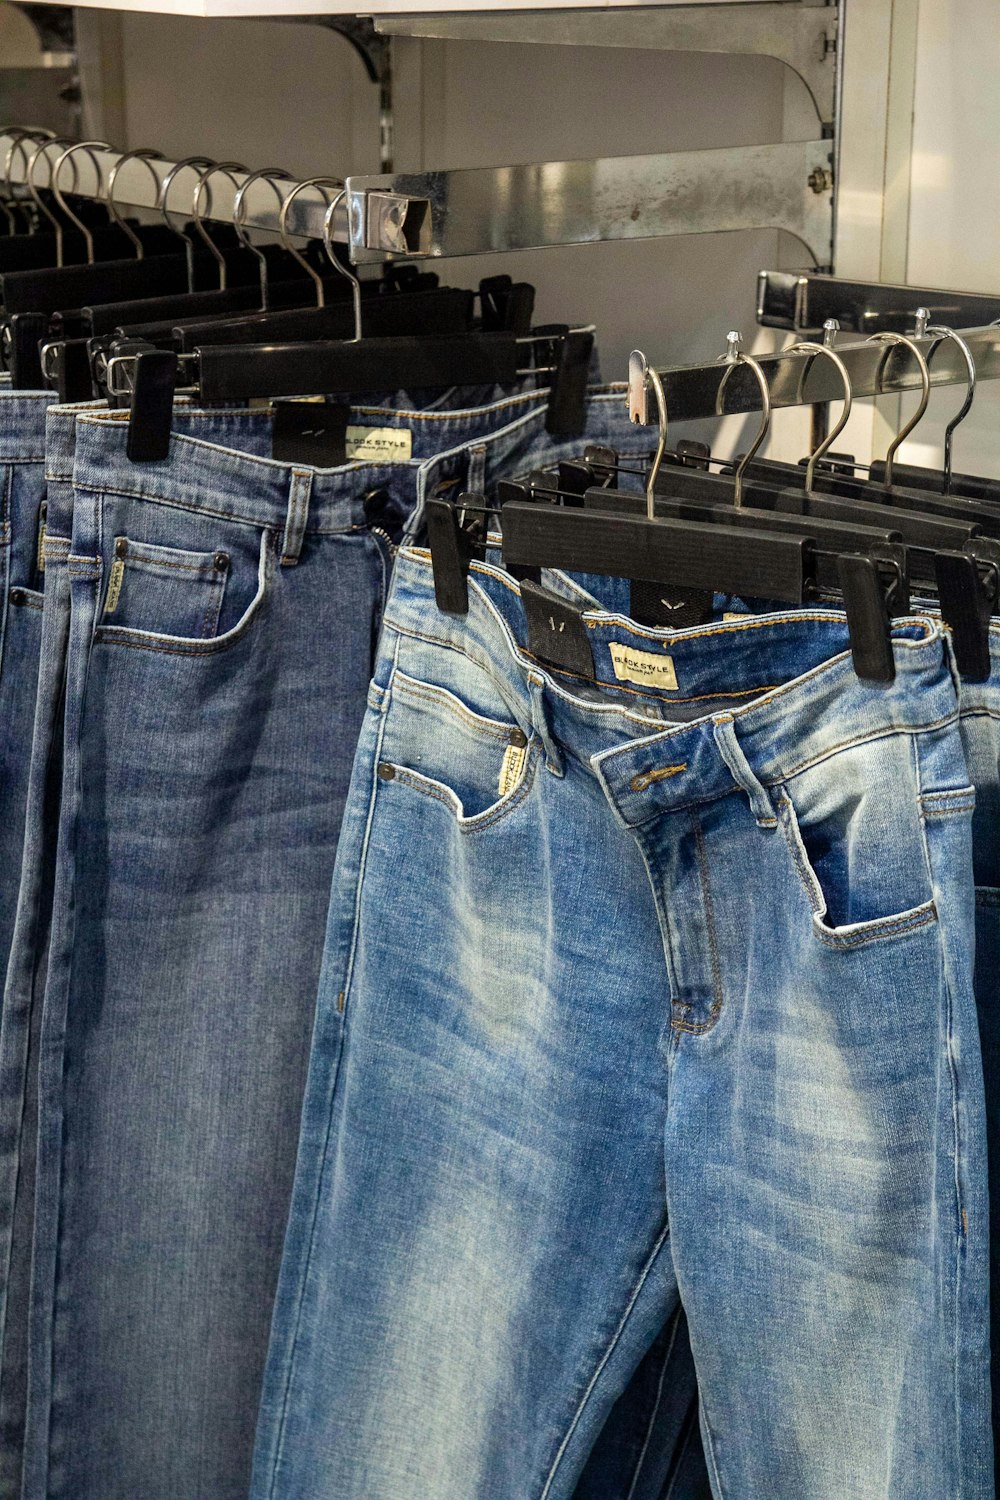 several pairs of jeans hanging on a rack